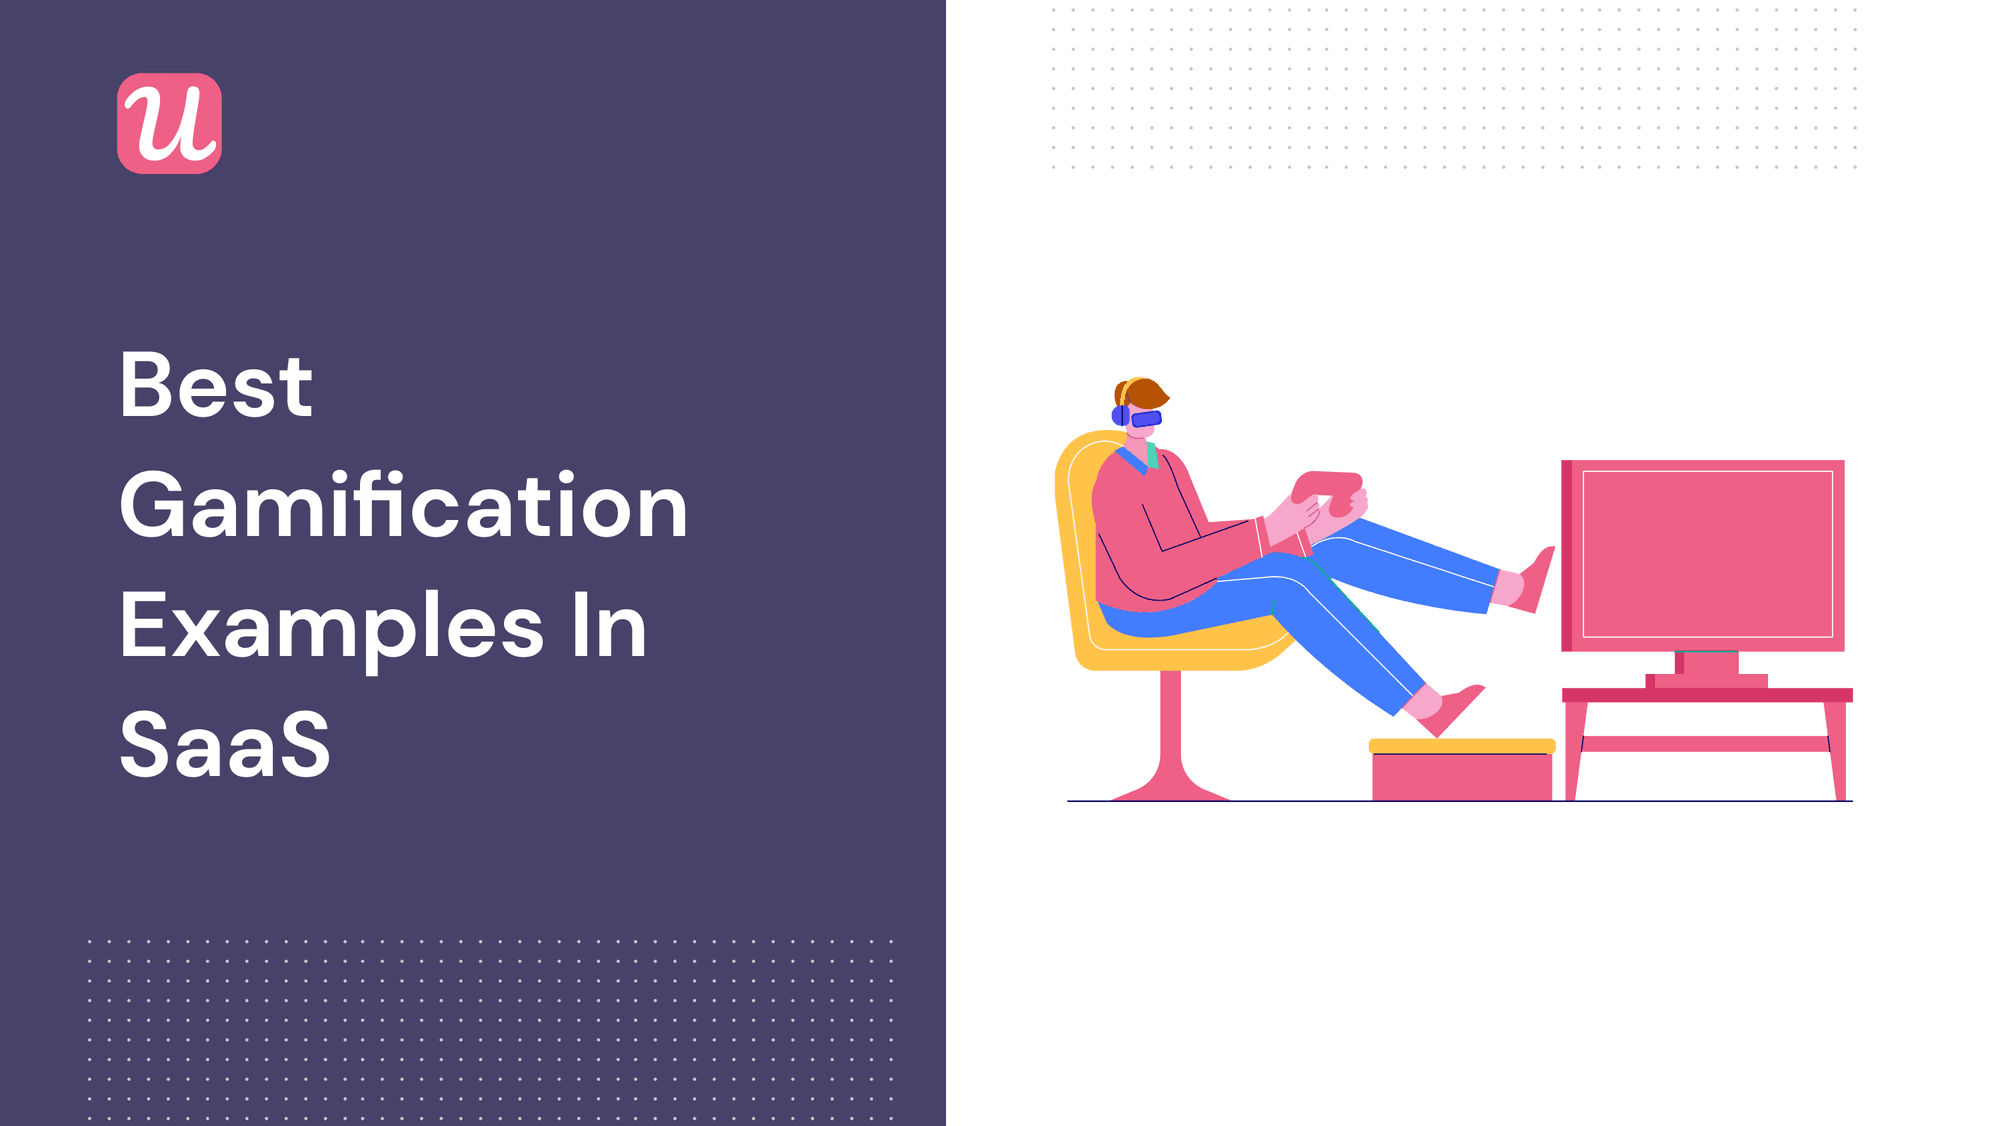 Best gamification examples in SaaS